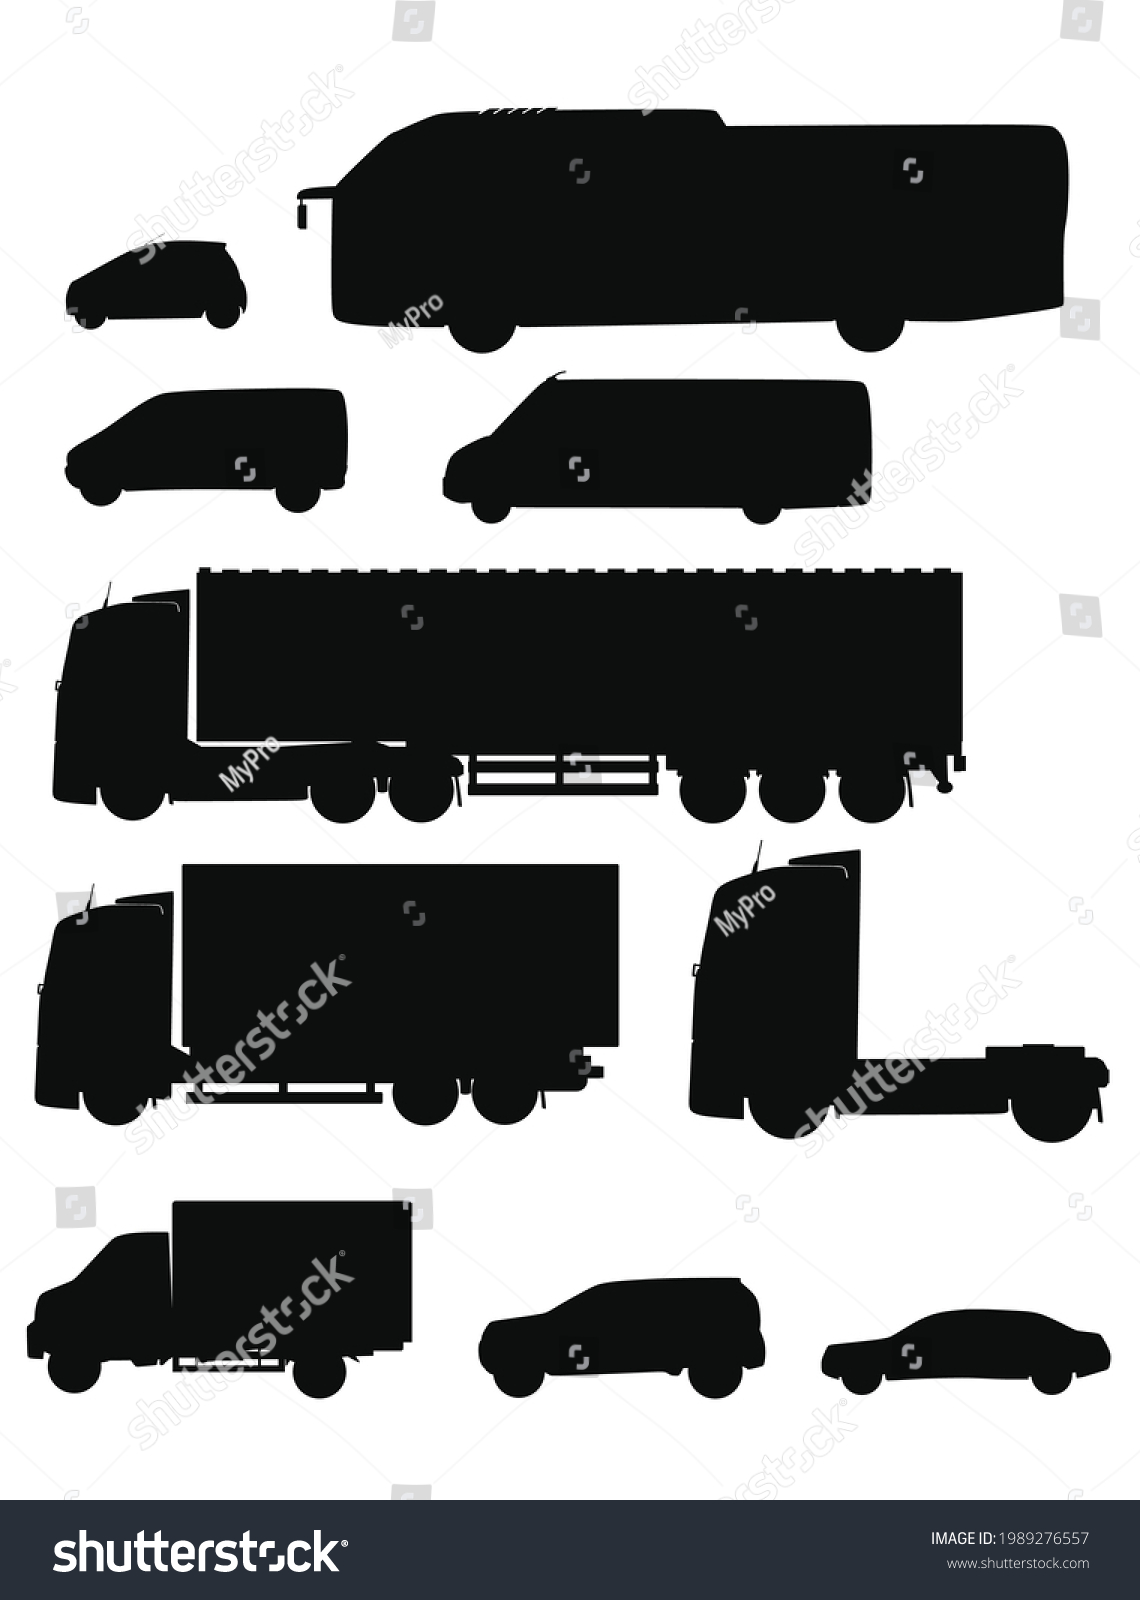 Transport Vehicles Silhouettes Vector Illustration Stock Vector ...